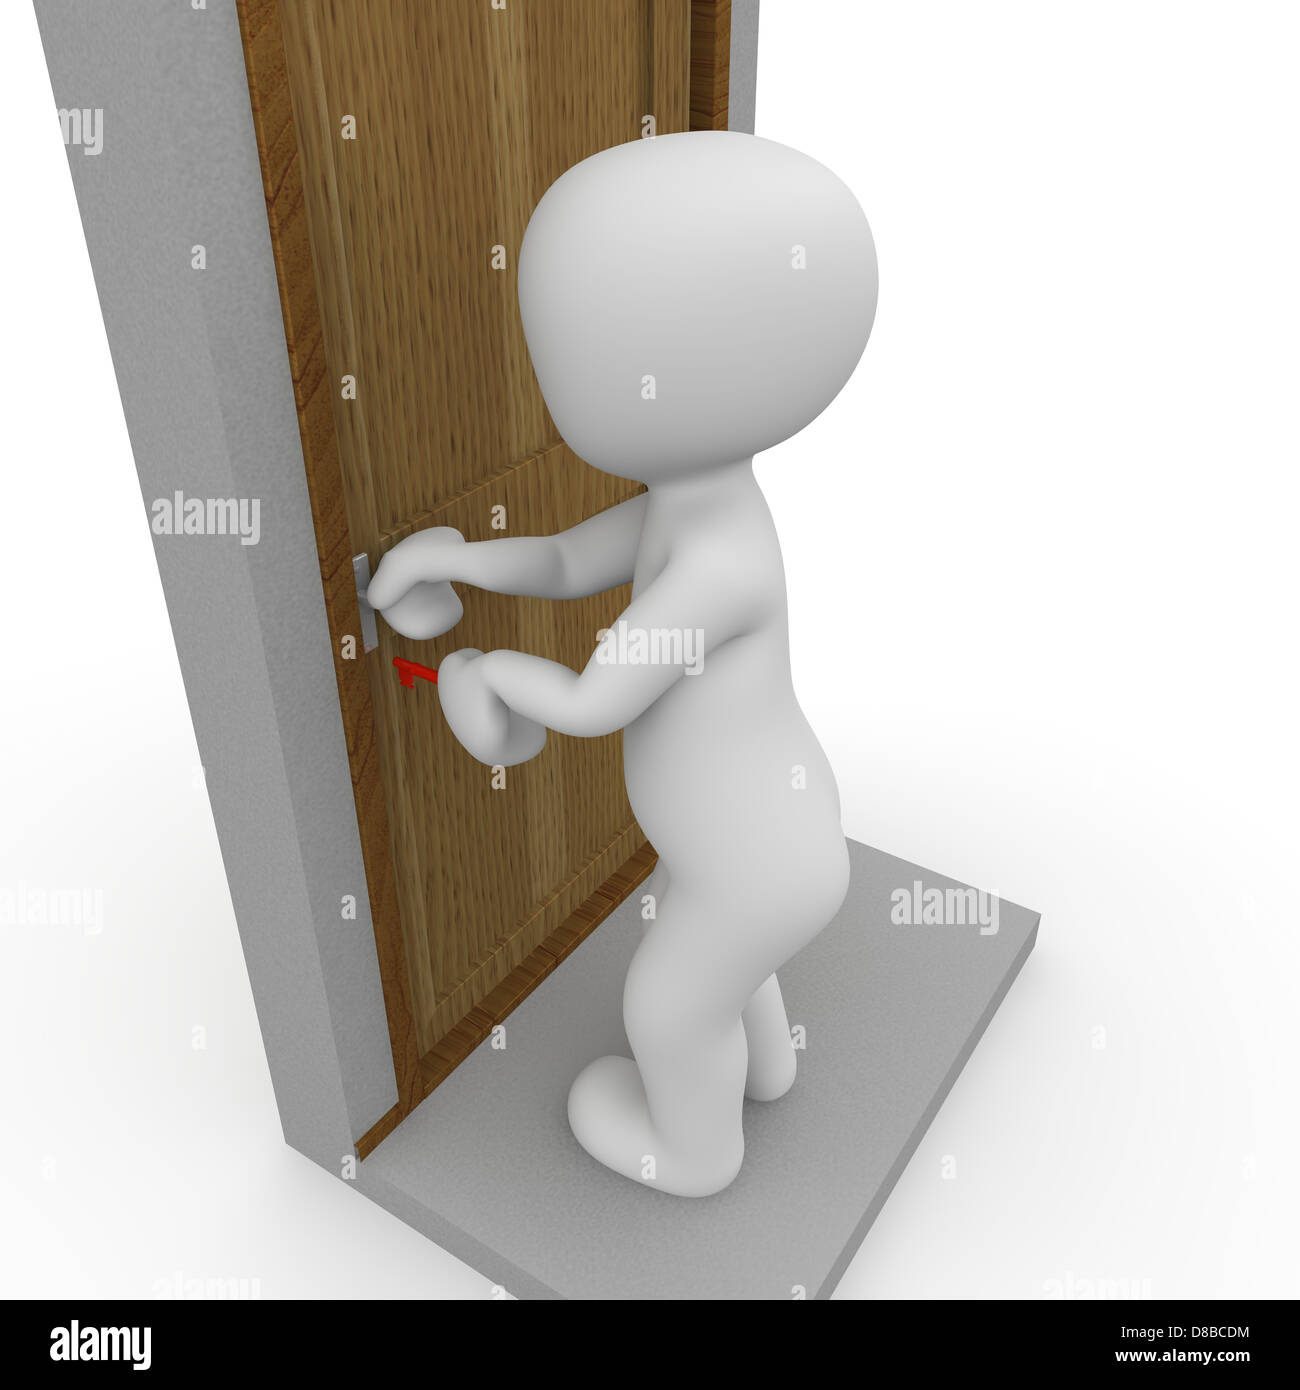 The door is opened with a key. Stock Photo